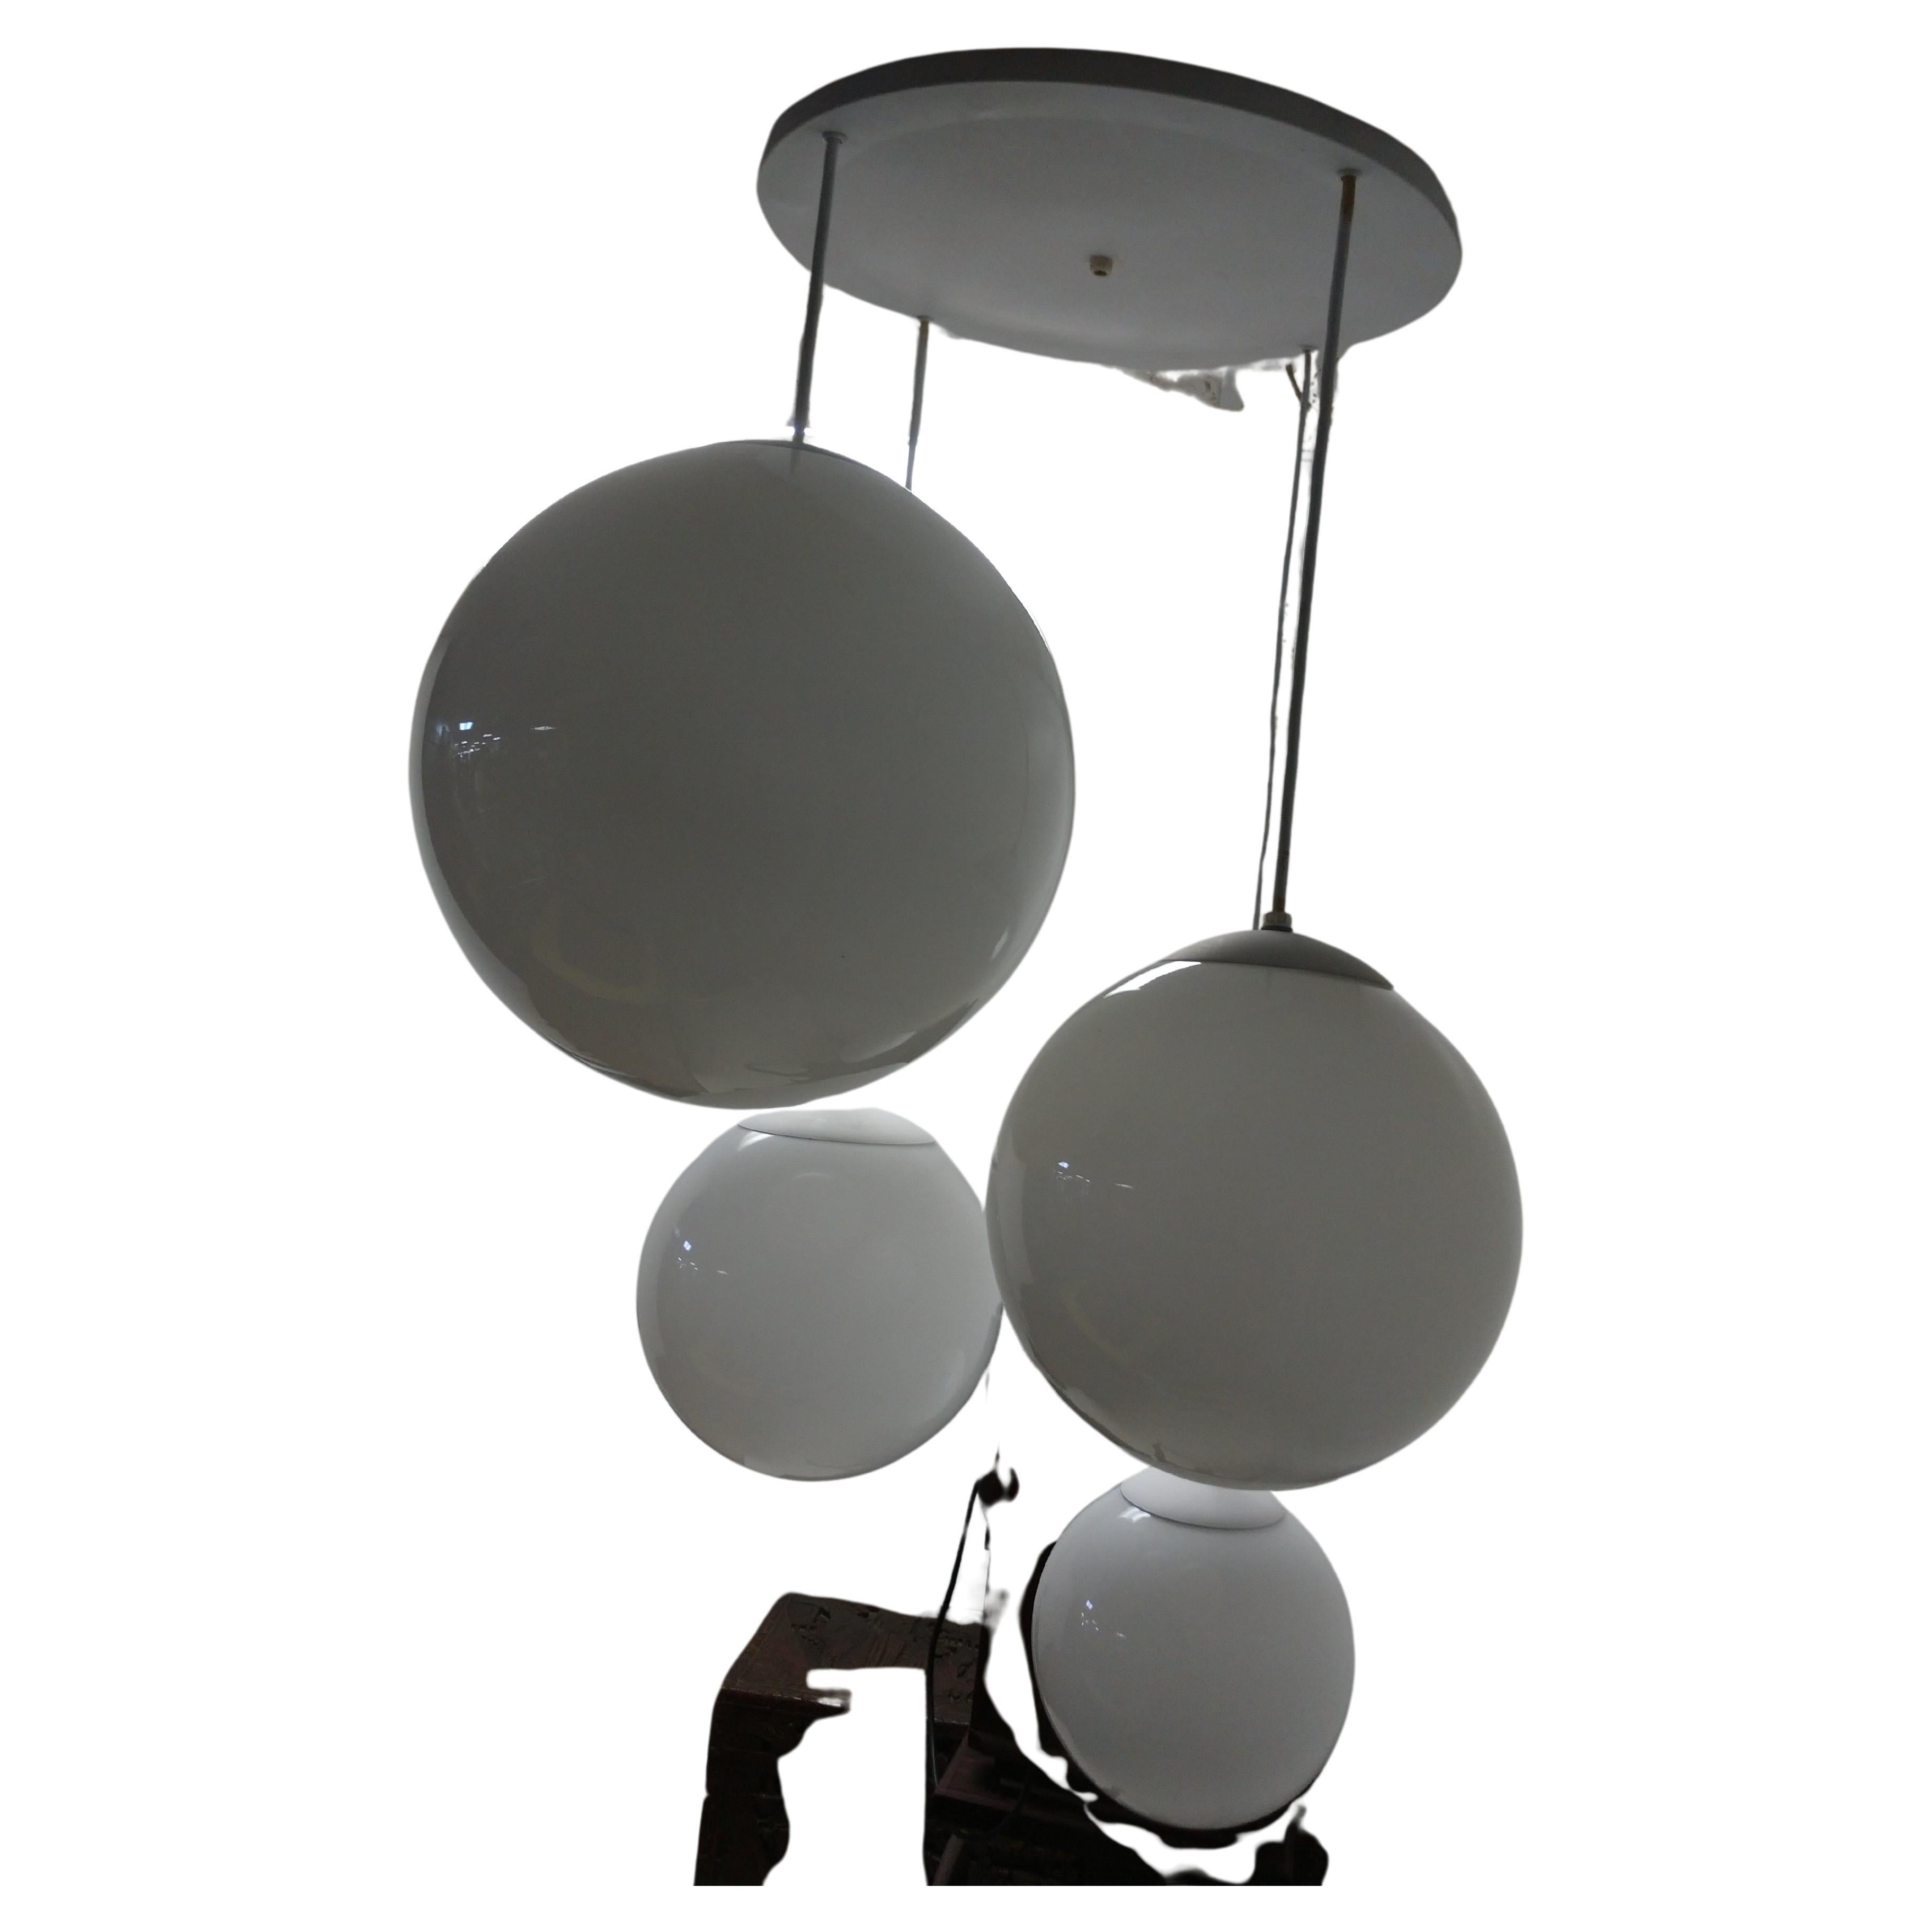 Rare and hard to find pendant chandelier with 4 shades sizes are; 16in. 9in. and 2 11in. Milk glass globes are in excellent condition. A very joyous light fixture. 
Original wiring is sound, not dried out. One globe (11in) has been replaced with